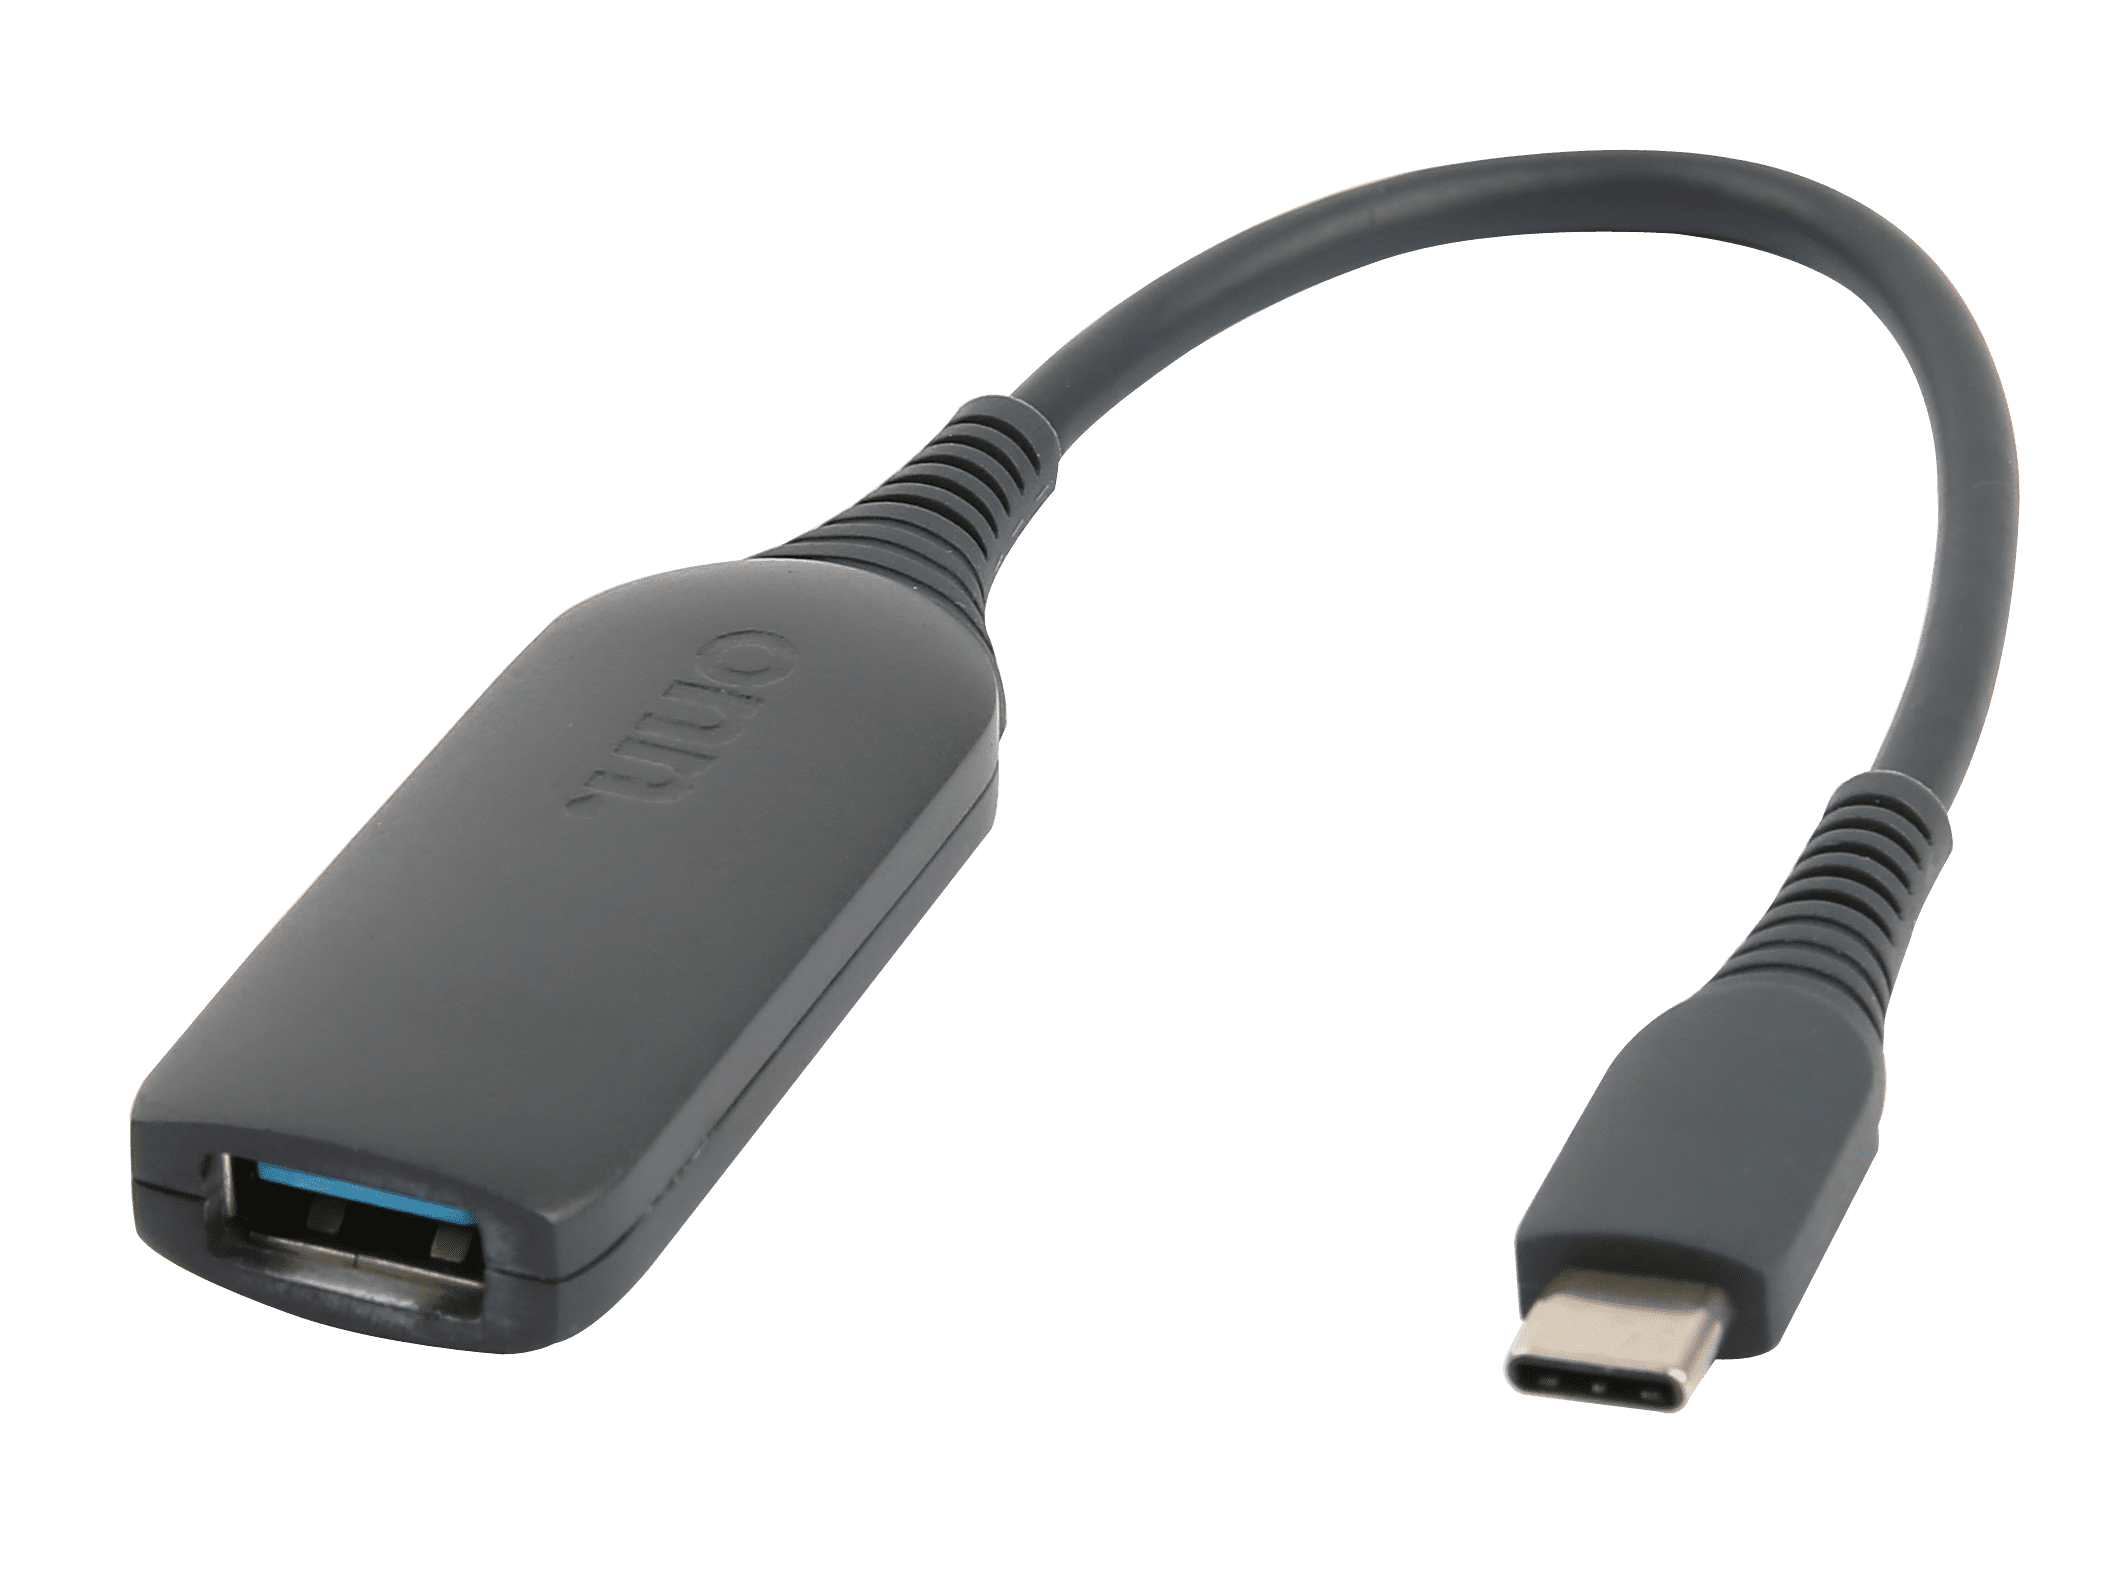 Vej fordøje Messing onn. USB-C to USB Female Adapter, 4" Cable, Compliant with USB 3.1 Gen 1  and Supports Data Transfer up To 5 Gbps - Walmart.com